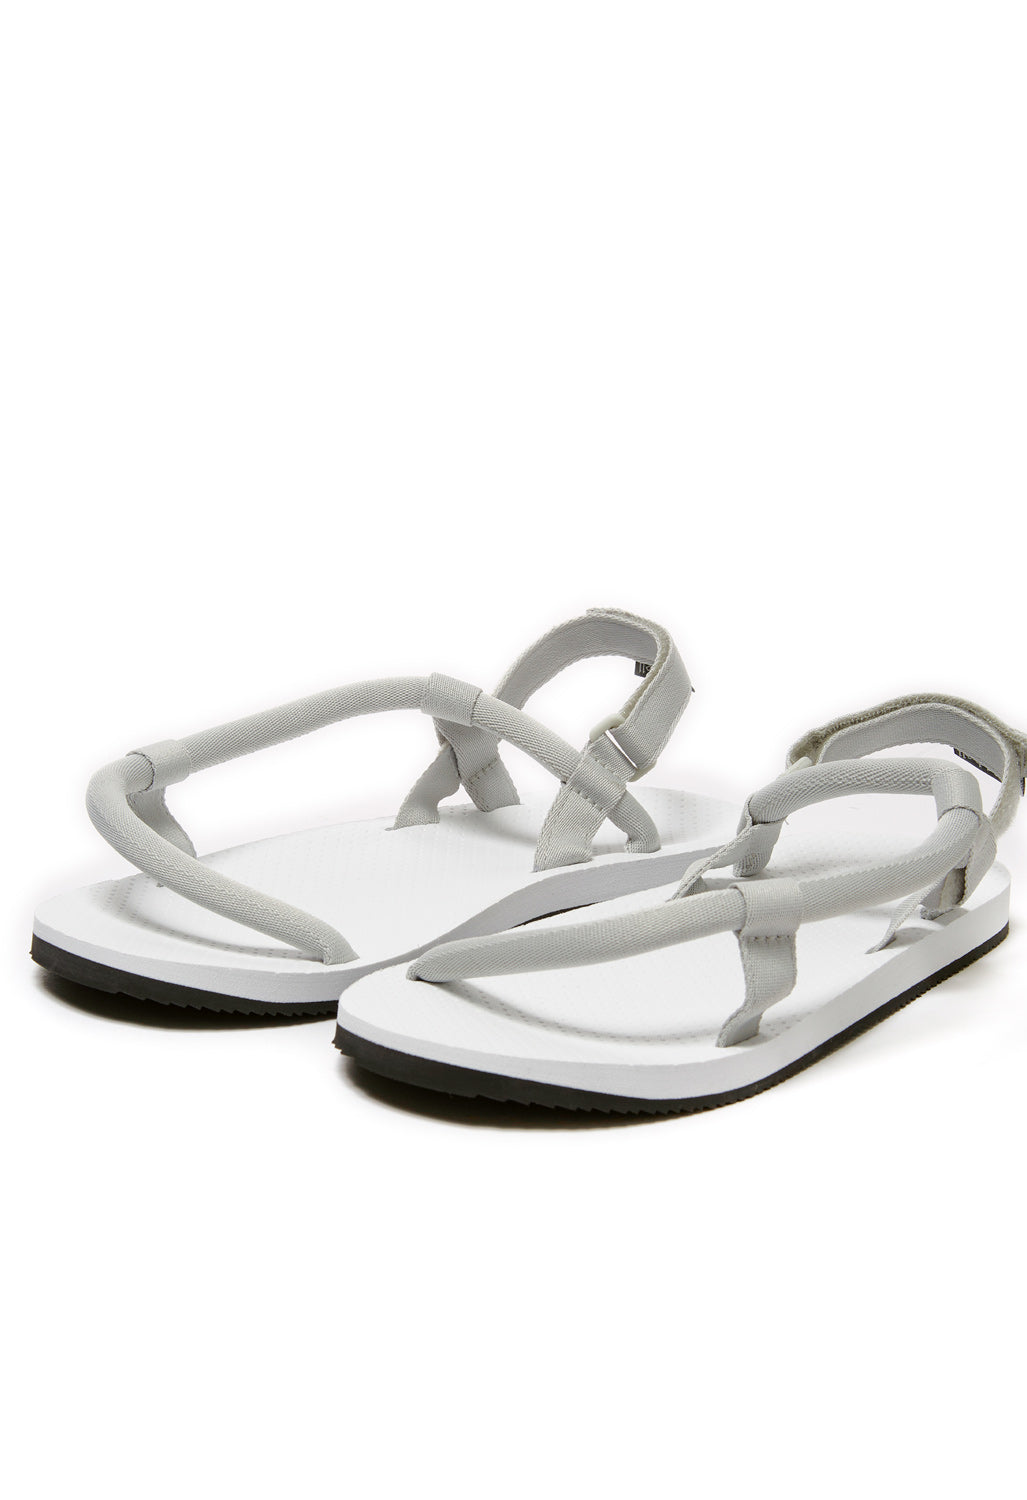 Montbell Lock-On Sandals - White/Light Silver